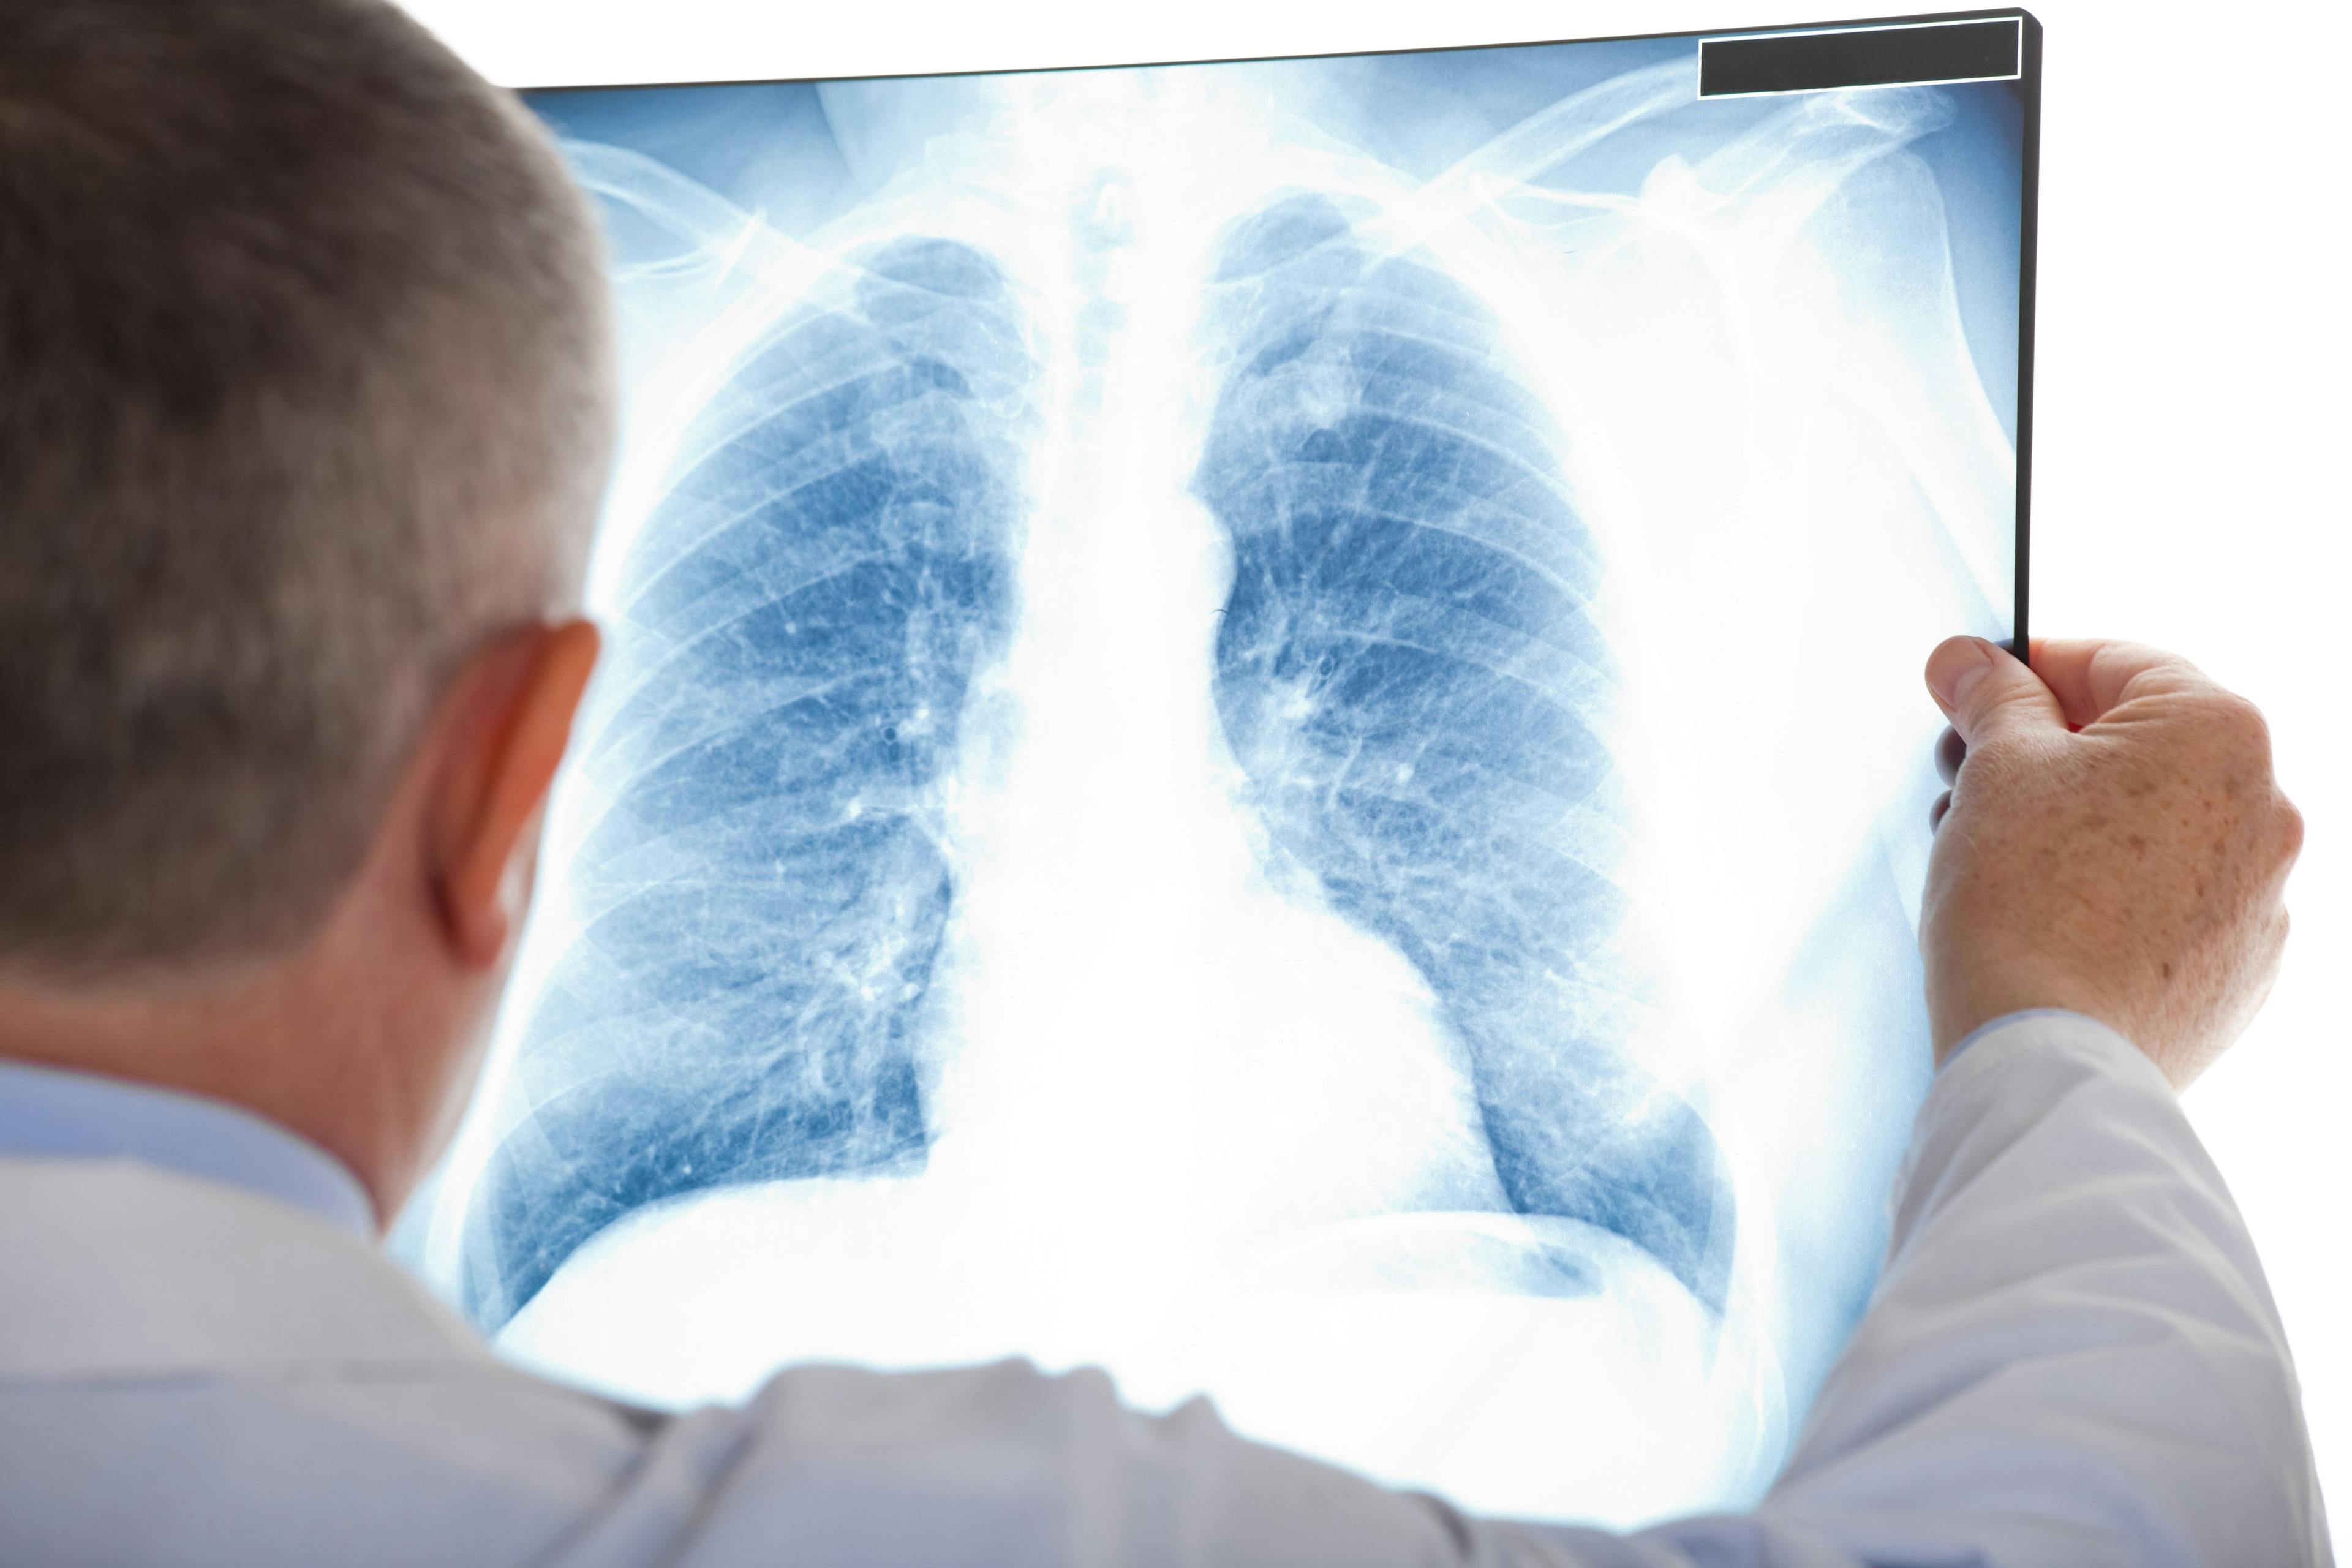 Prediction Model Identified Risk Factors for ED Visits in Patients With Lung Cancer